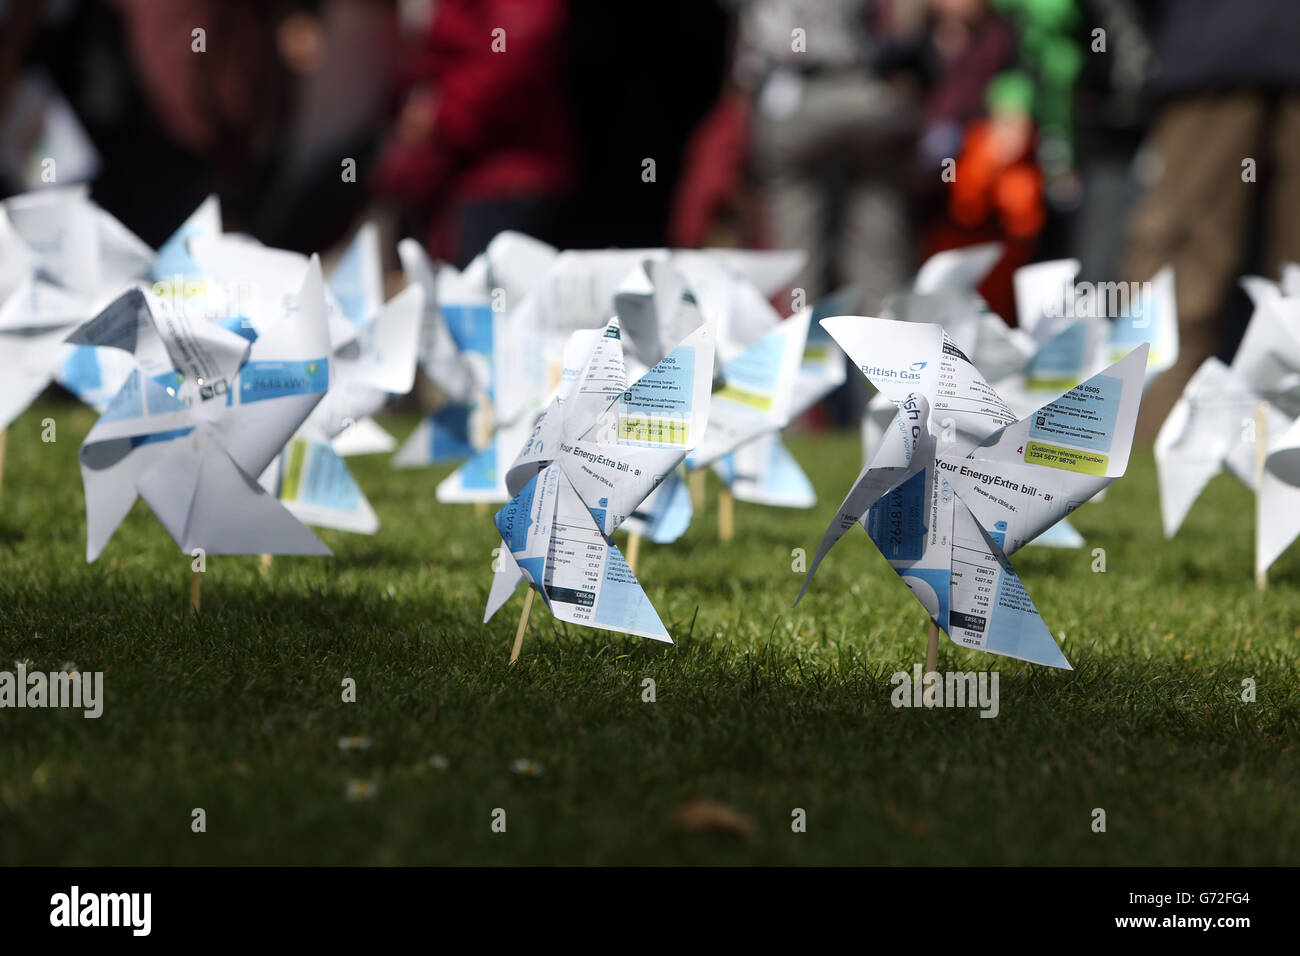 Windmills made from British Gas bills placed by protesters outside the Queen Elizabeth II Conference Centre in central London, during the Centrica AGM. Stock Photo